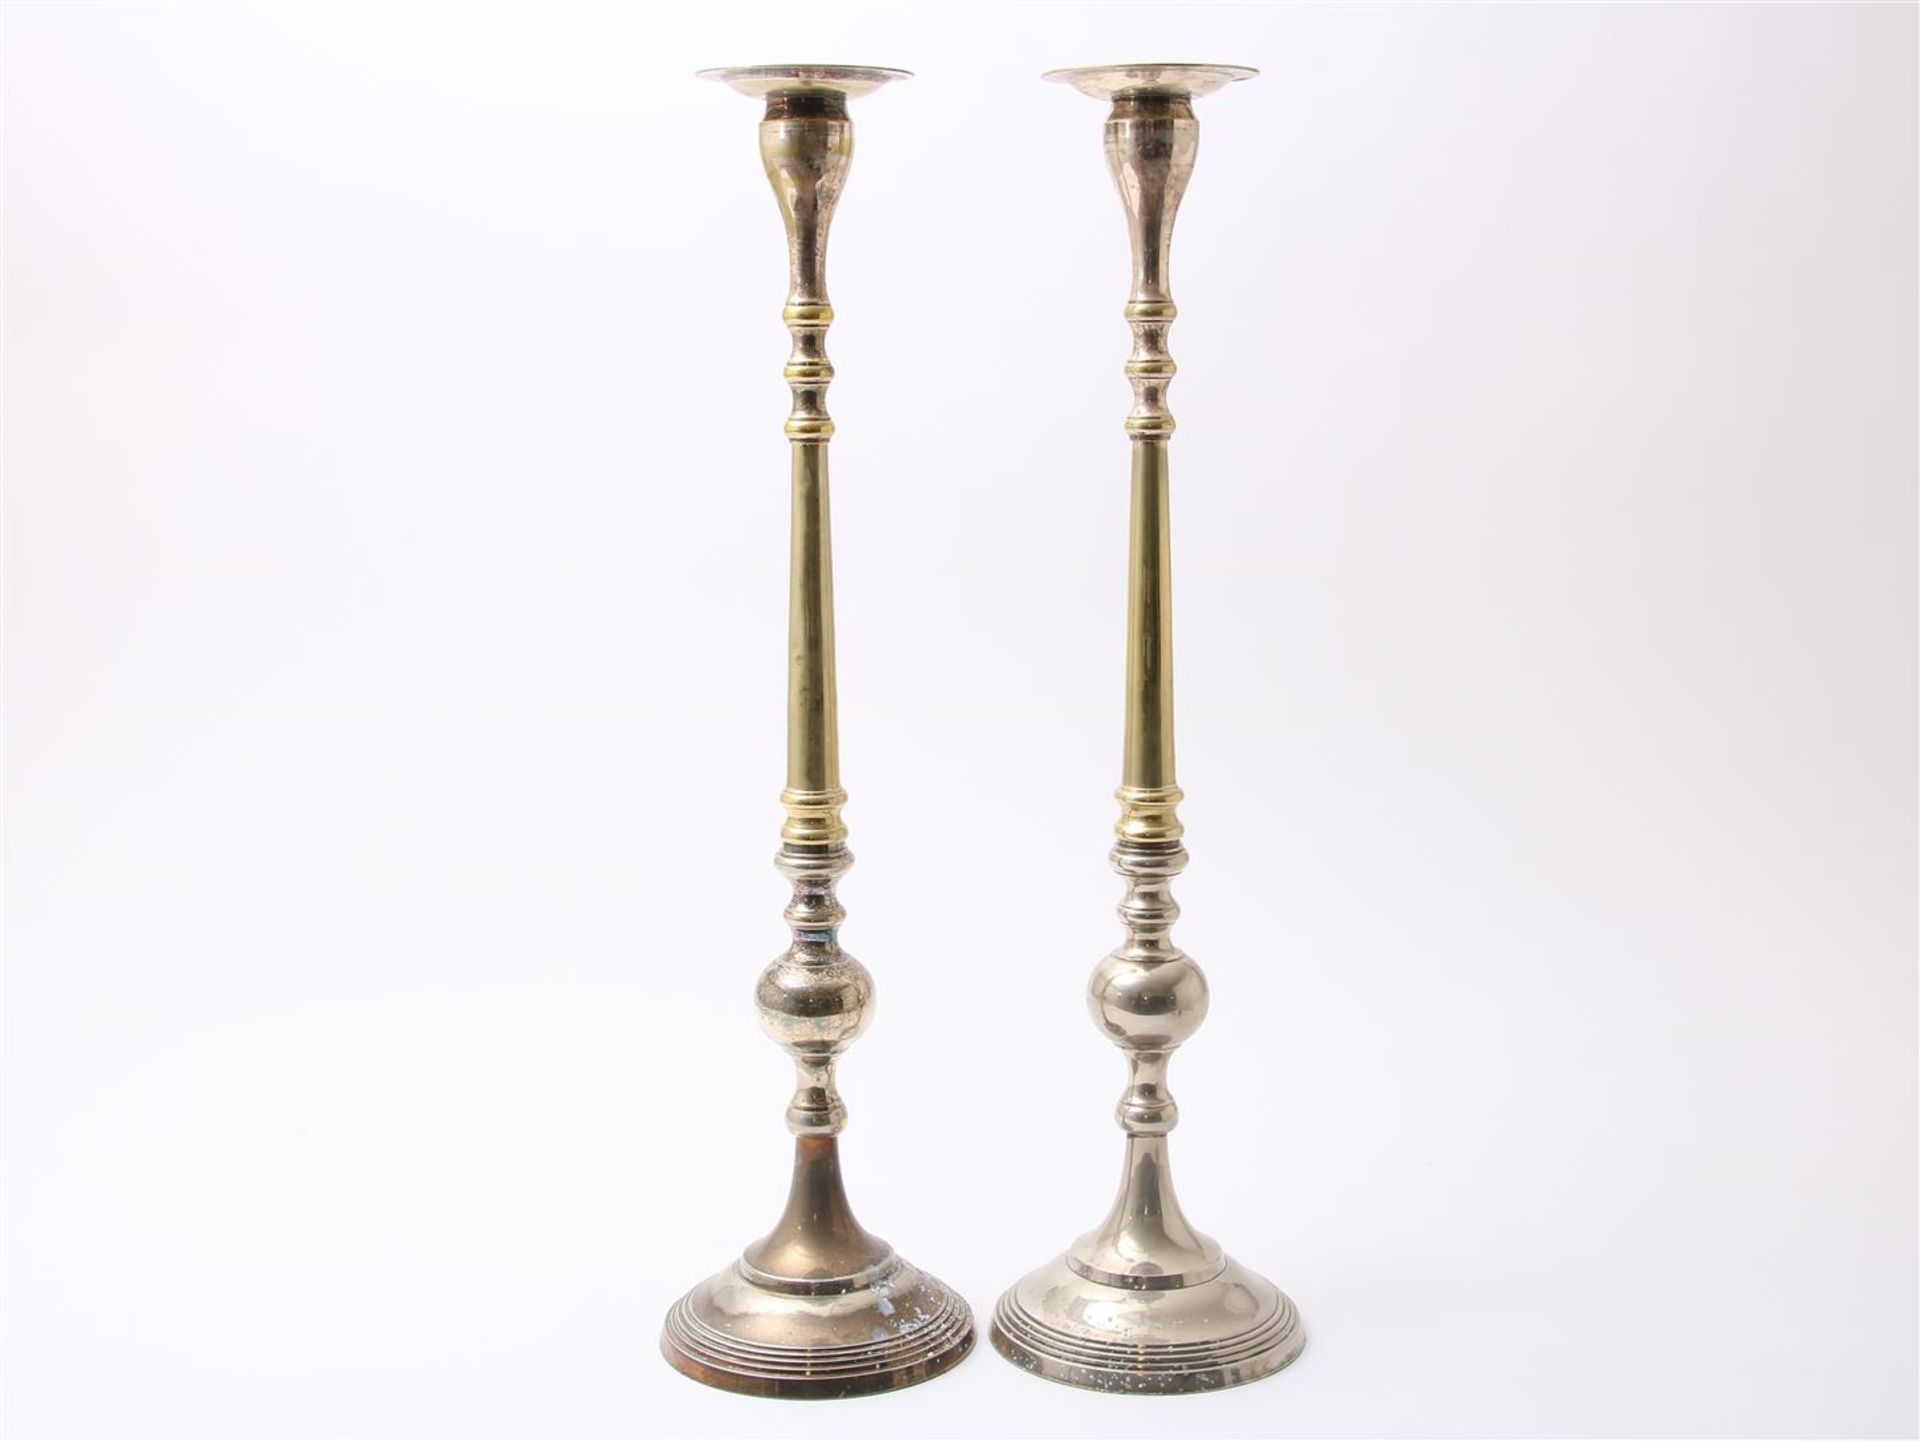  Set of silver-plated candlesticks 